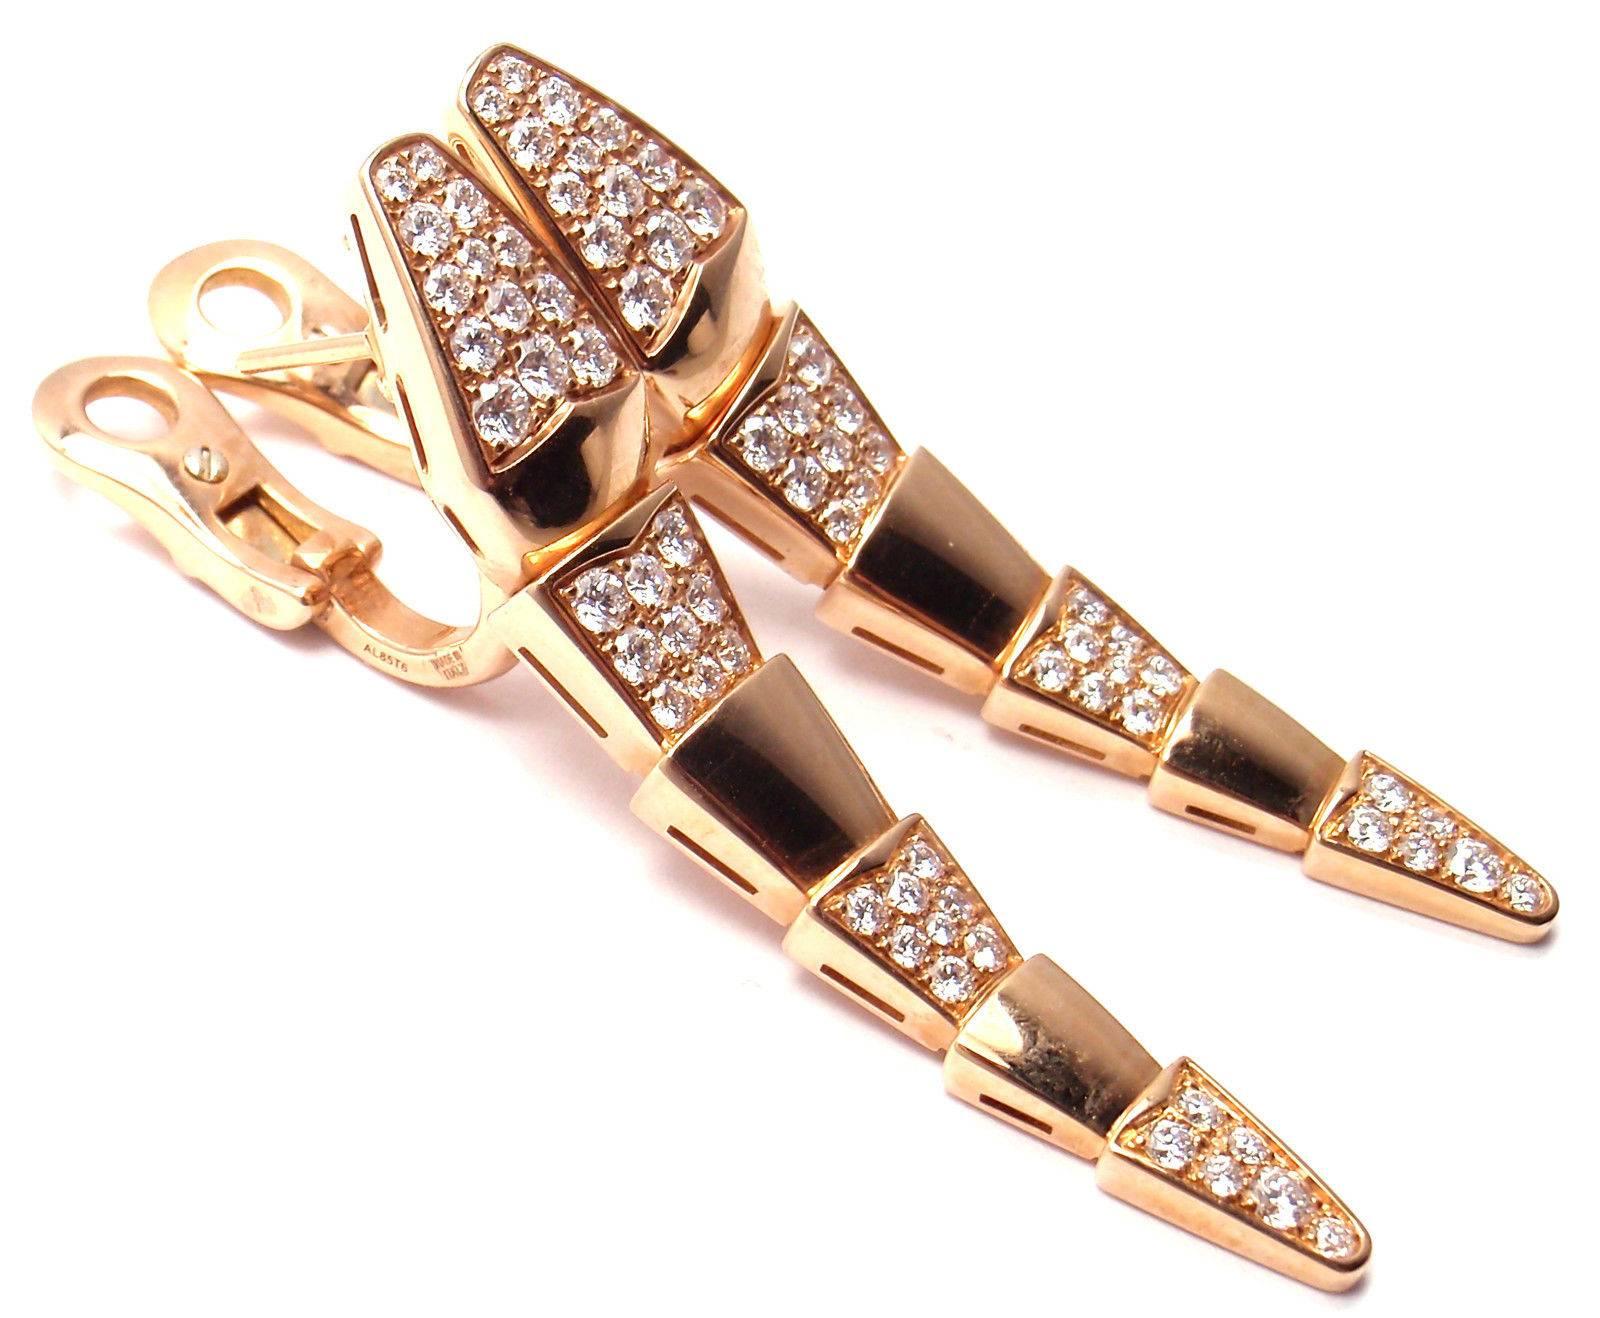 18k Rose Gold Diamond Serpenti Snake Long Earrings by Bulgari. 
With 72 round brilliant cut diamonds VS1 clarity, E color
These earrings are for pierced ears and they come with Bulgari box.

Details:
Measurements: 50mm x 9mm
Weight: 18.2